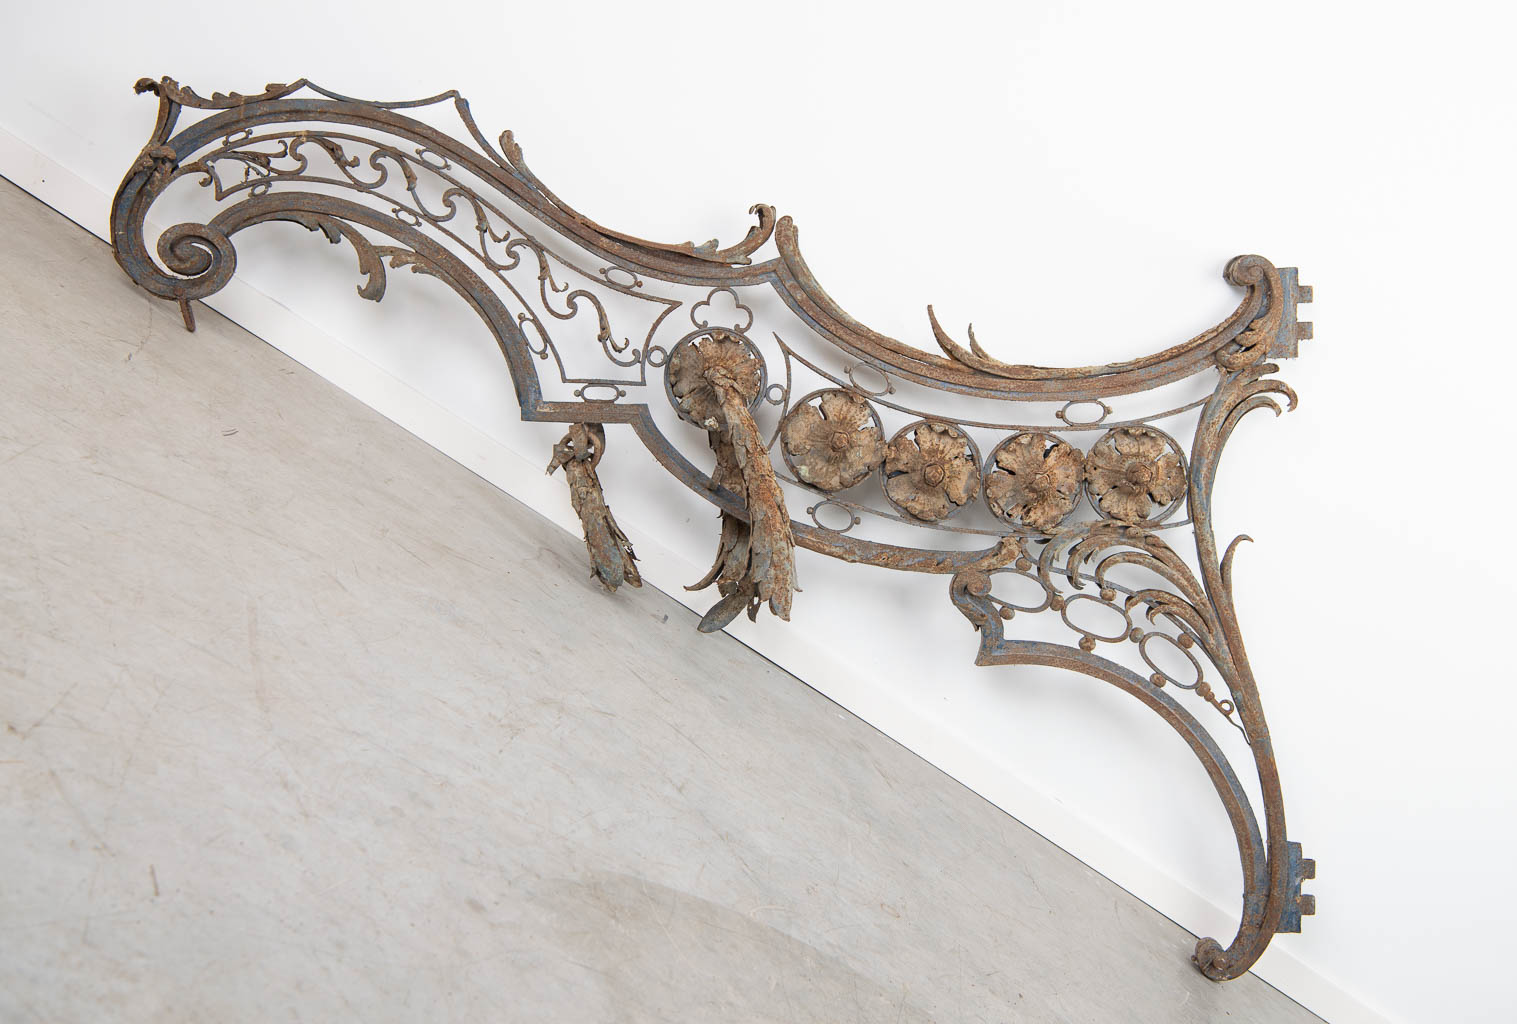 An antique standard for a road sign, made of wrought iron and richly decorated. (H:122cm)